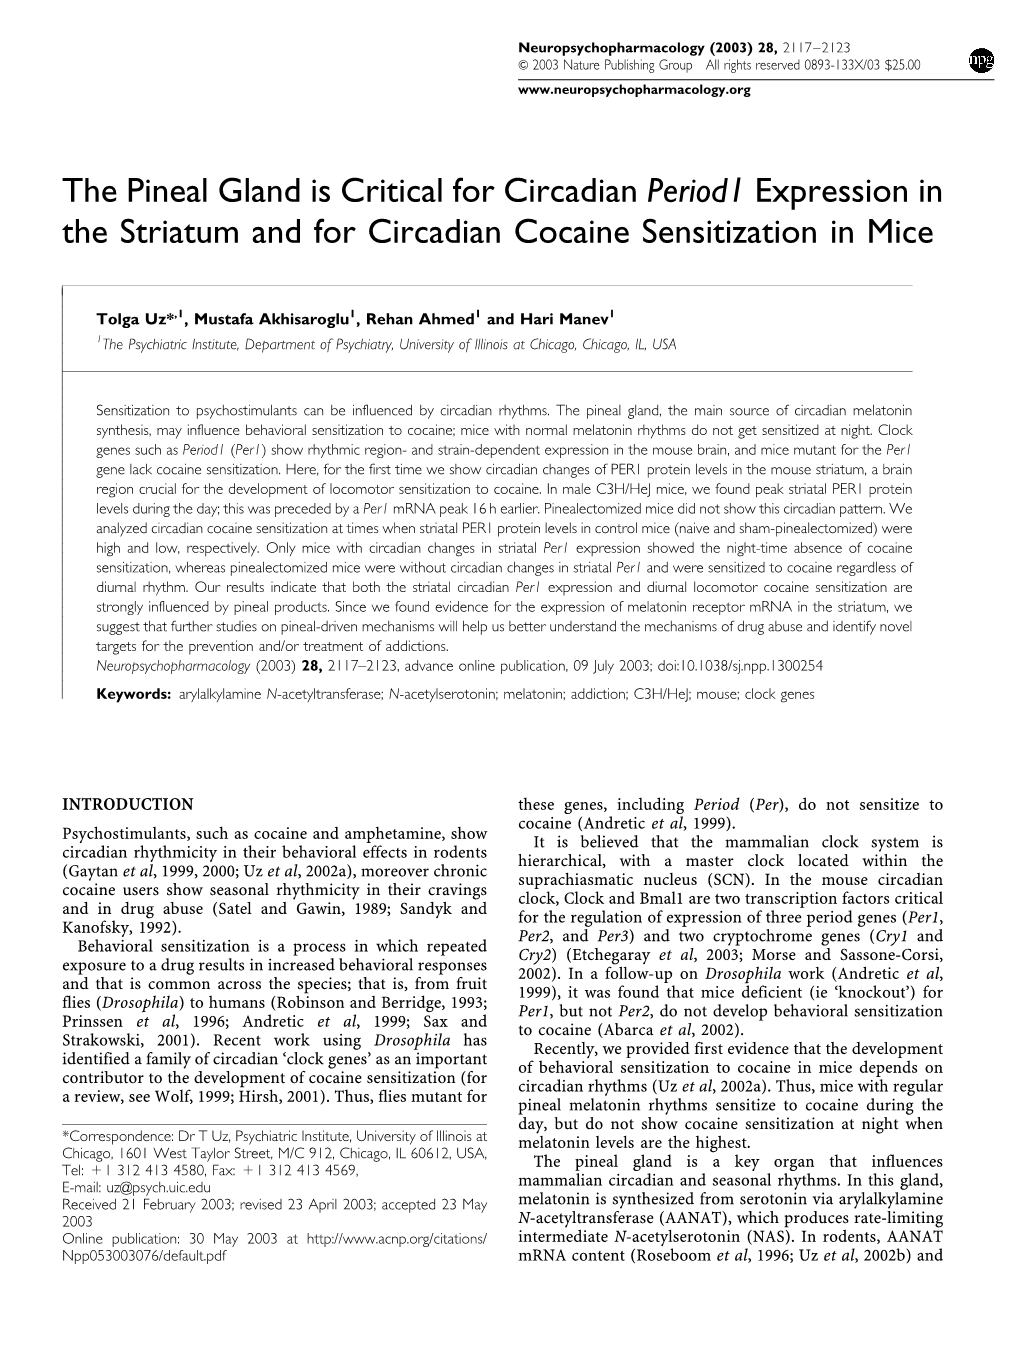 The Pineal Gland Is Critical for Circadian Period1 Expression in the Striatum and for Circadian Cocaine Sensitization in Mice